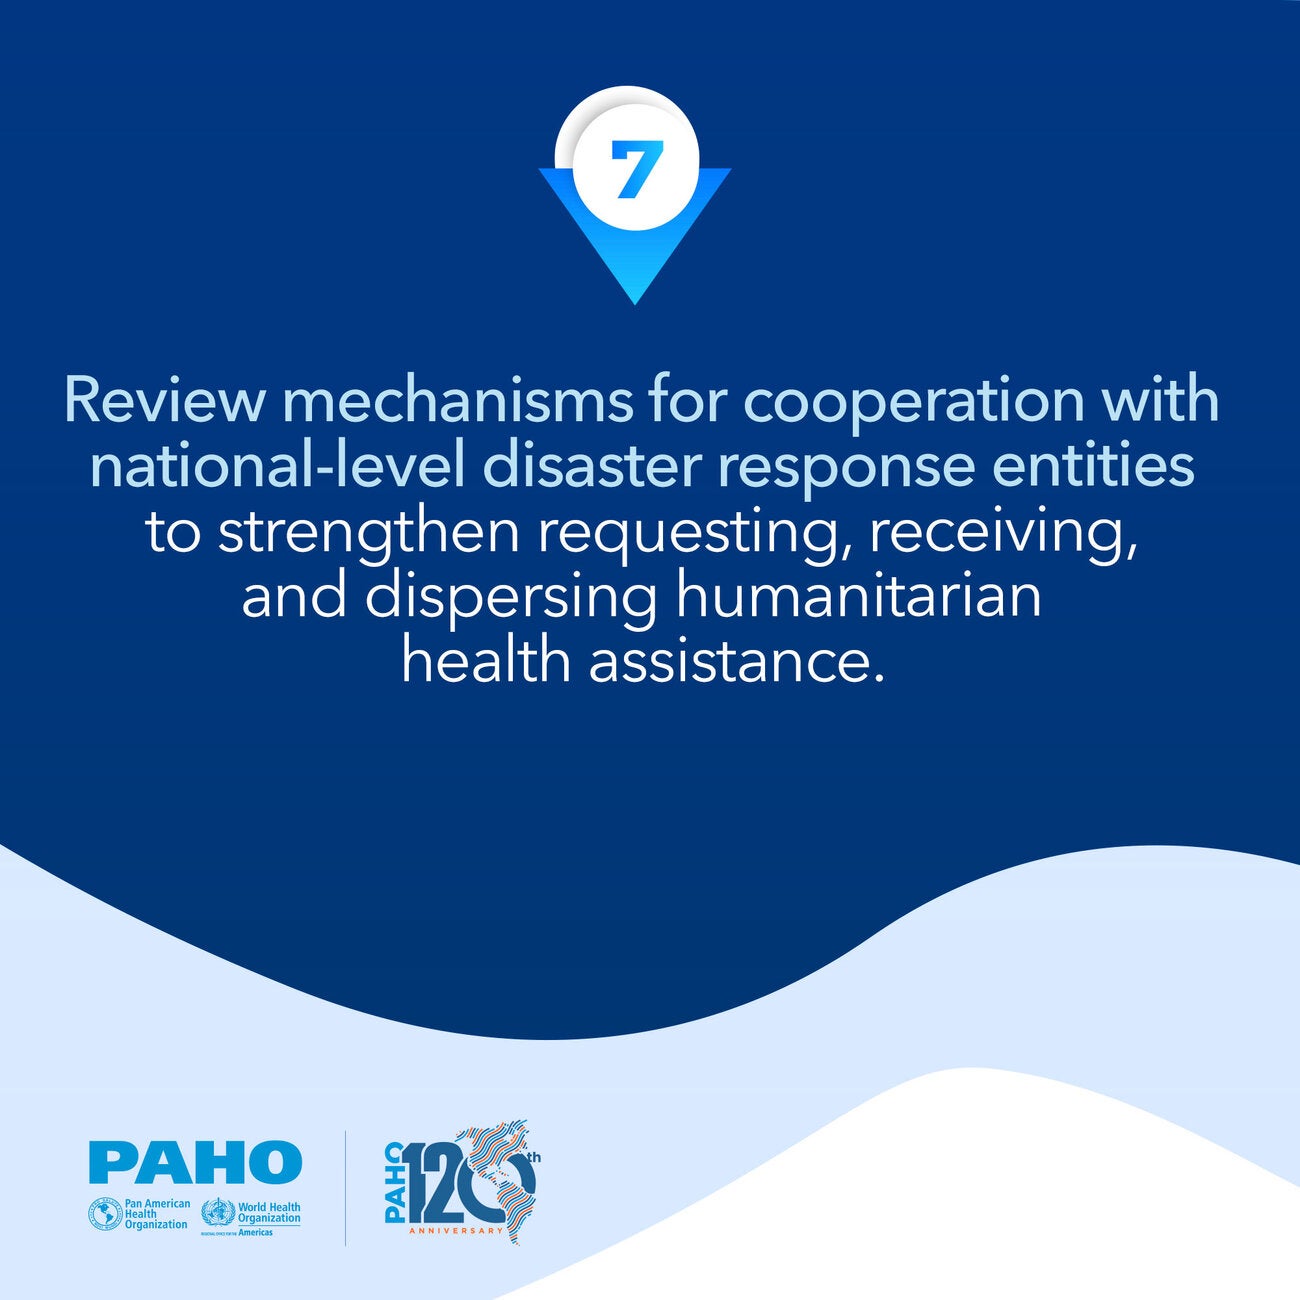 Review mechanisms for cooperation with national-level disaster response entities